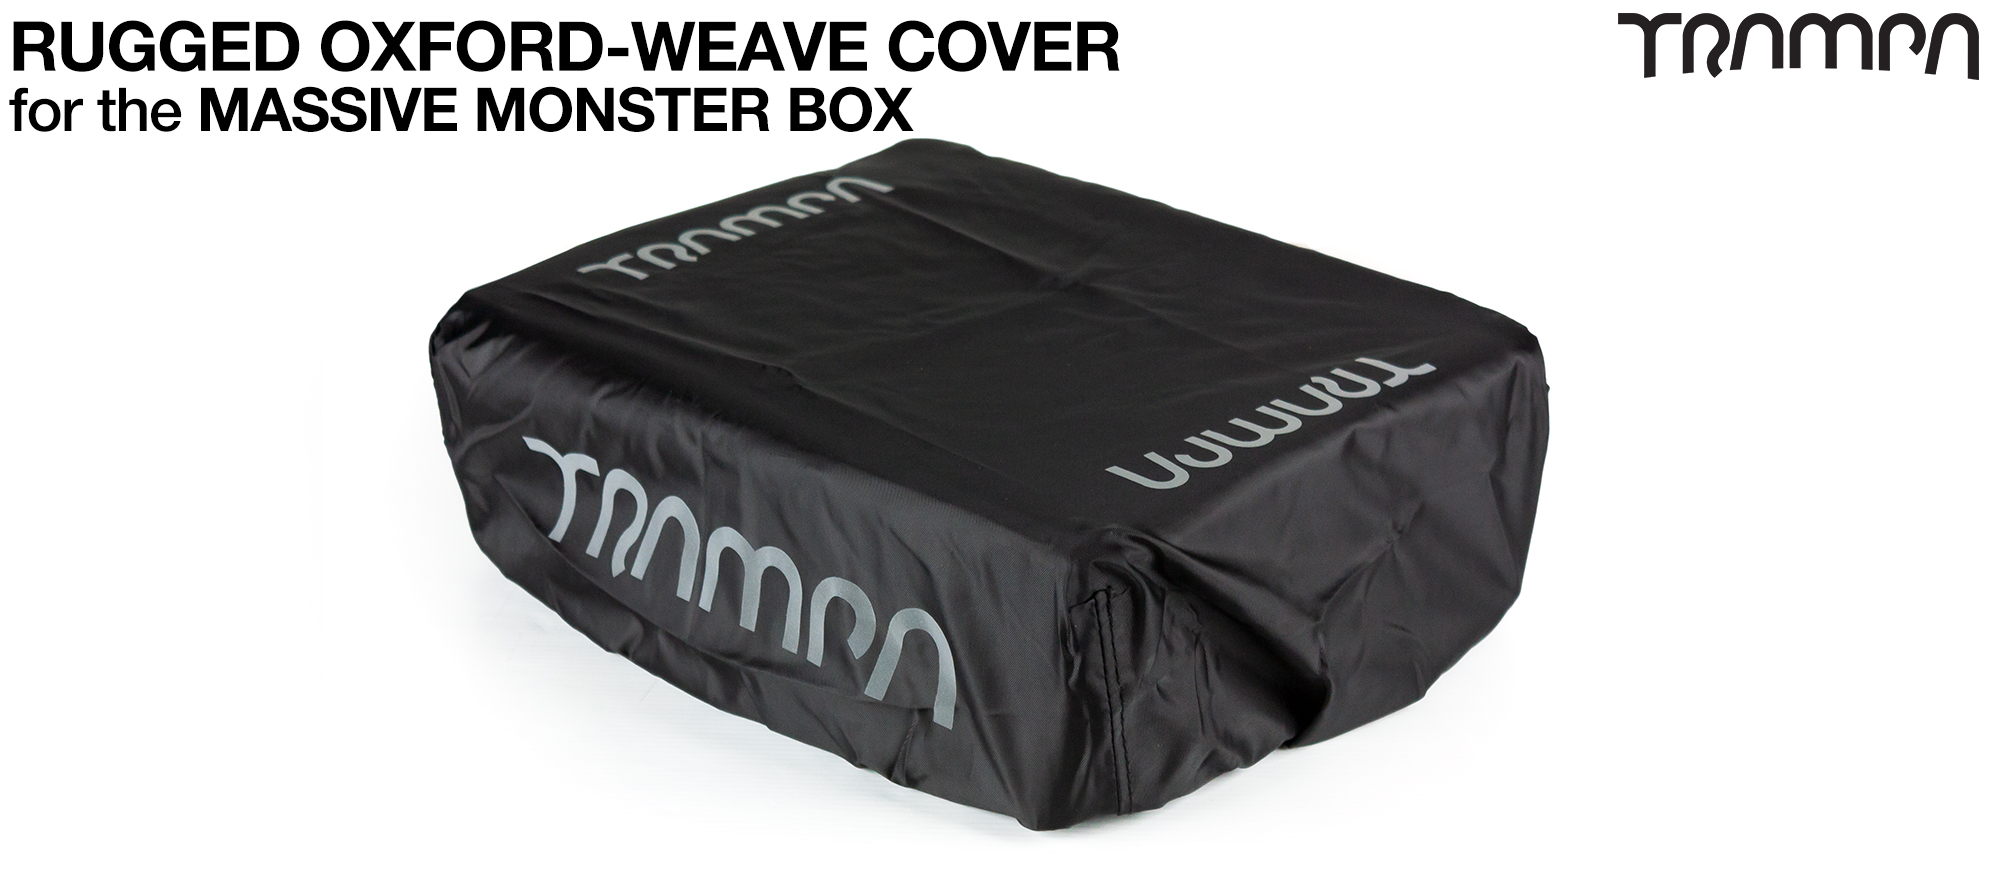 MASSIVE Monster Box - Rugged OXFORD Weave Protective Cover